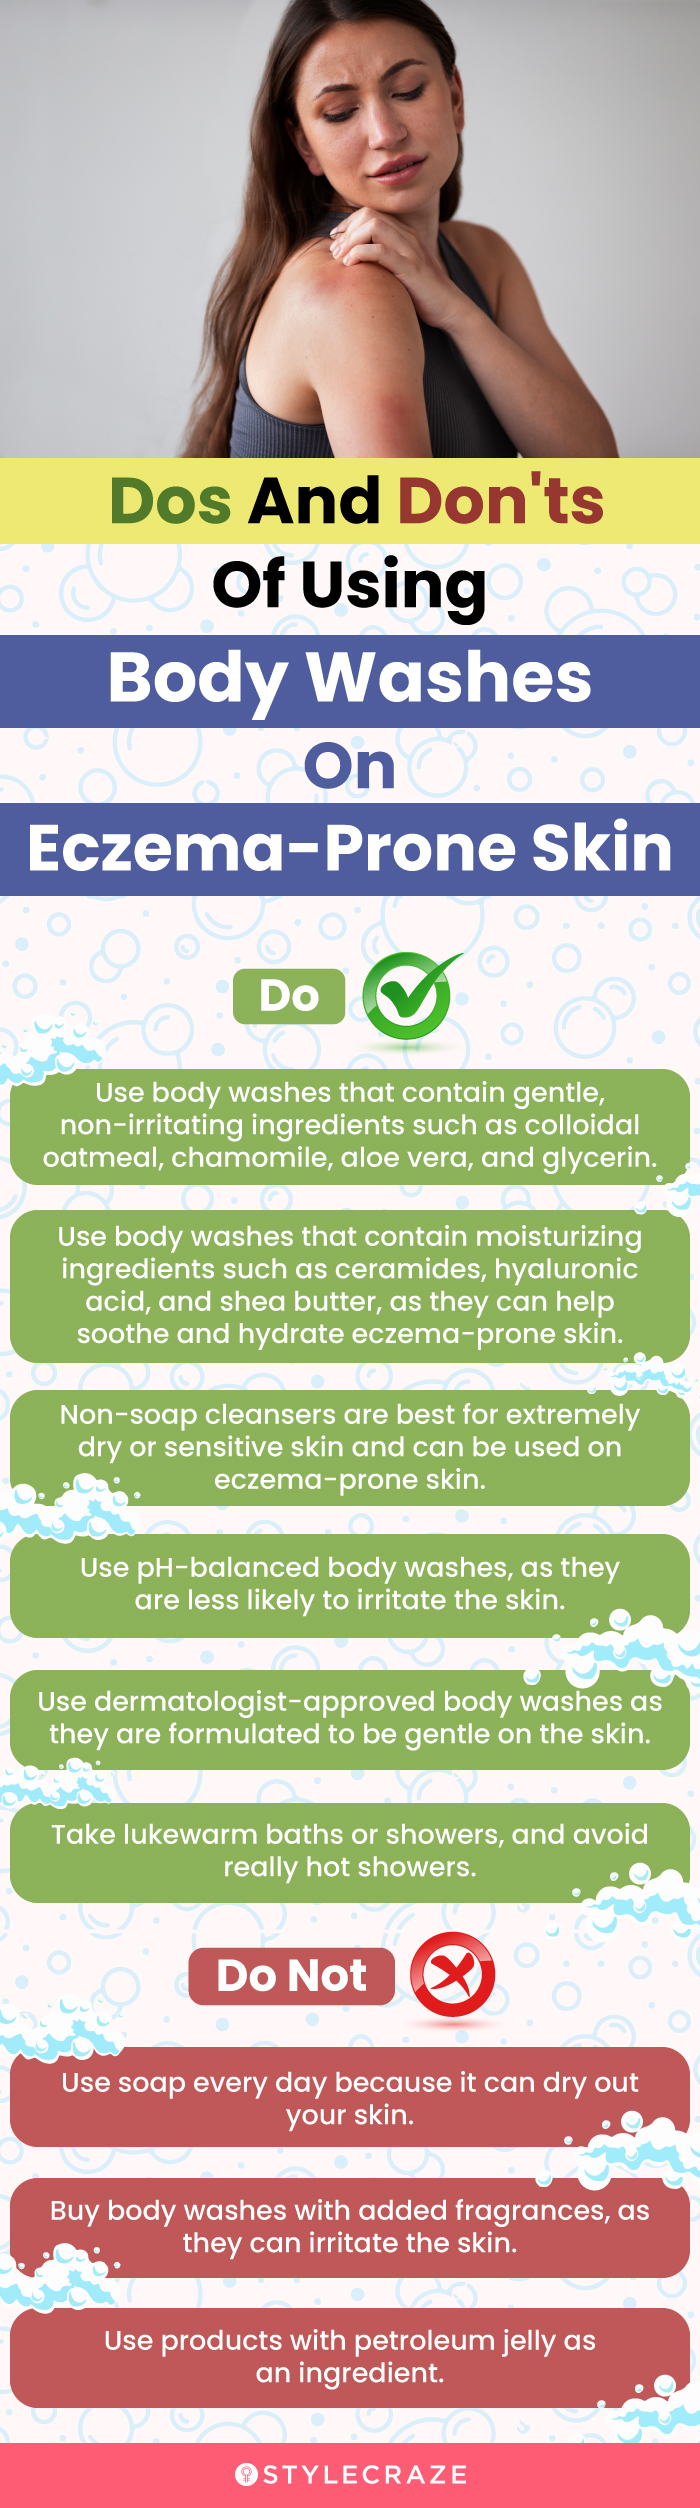 The Dos And Don'ts Of Using Body Washes On Eczema-Prone Skin (infographic)